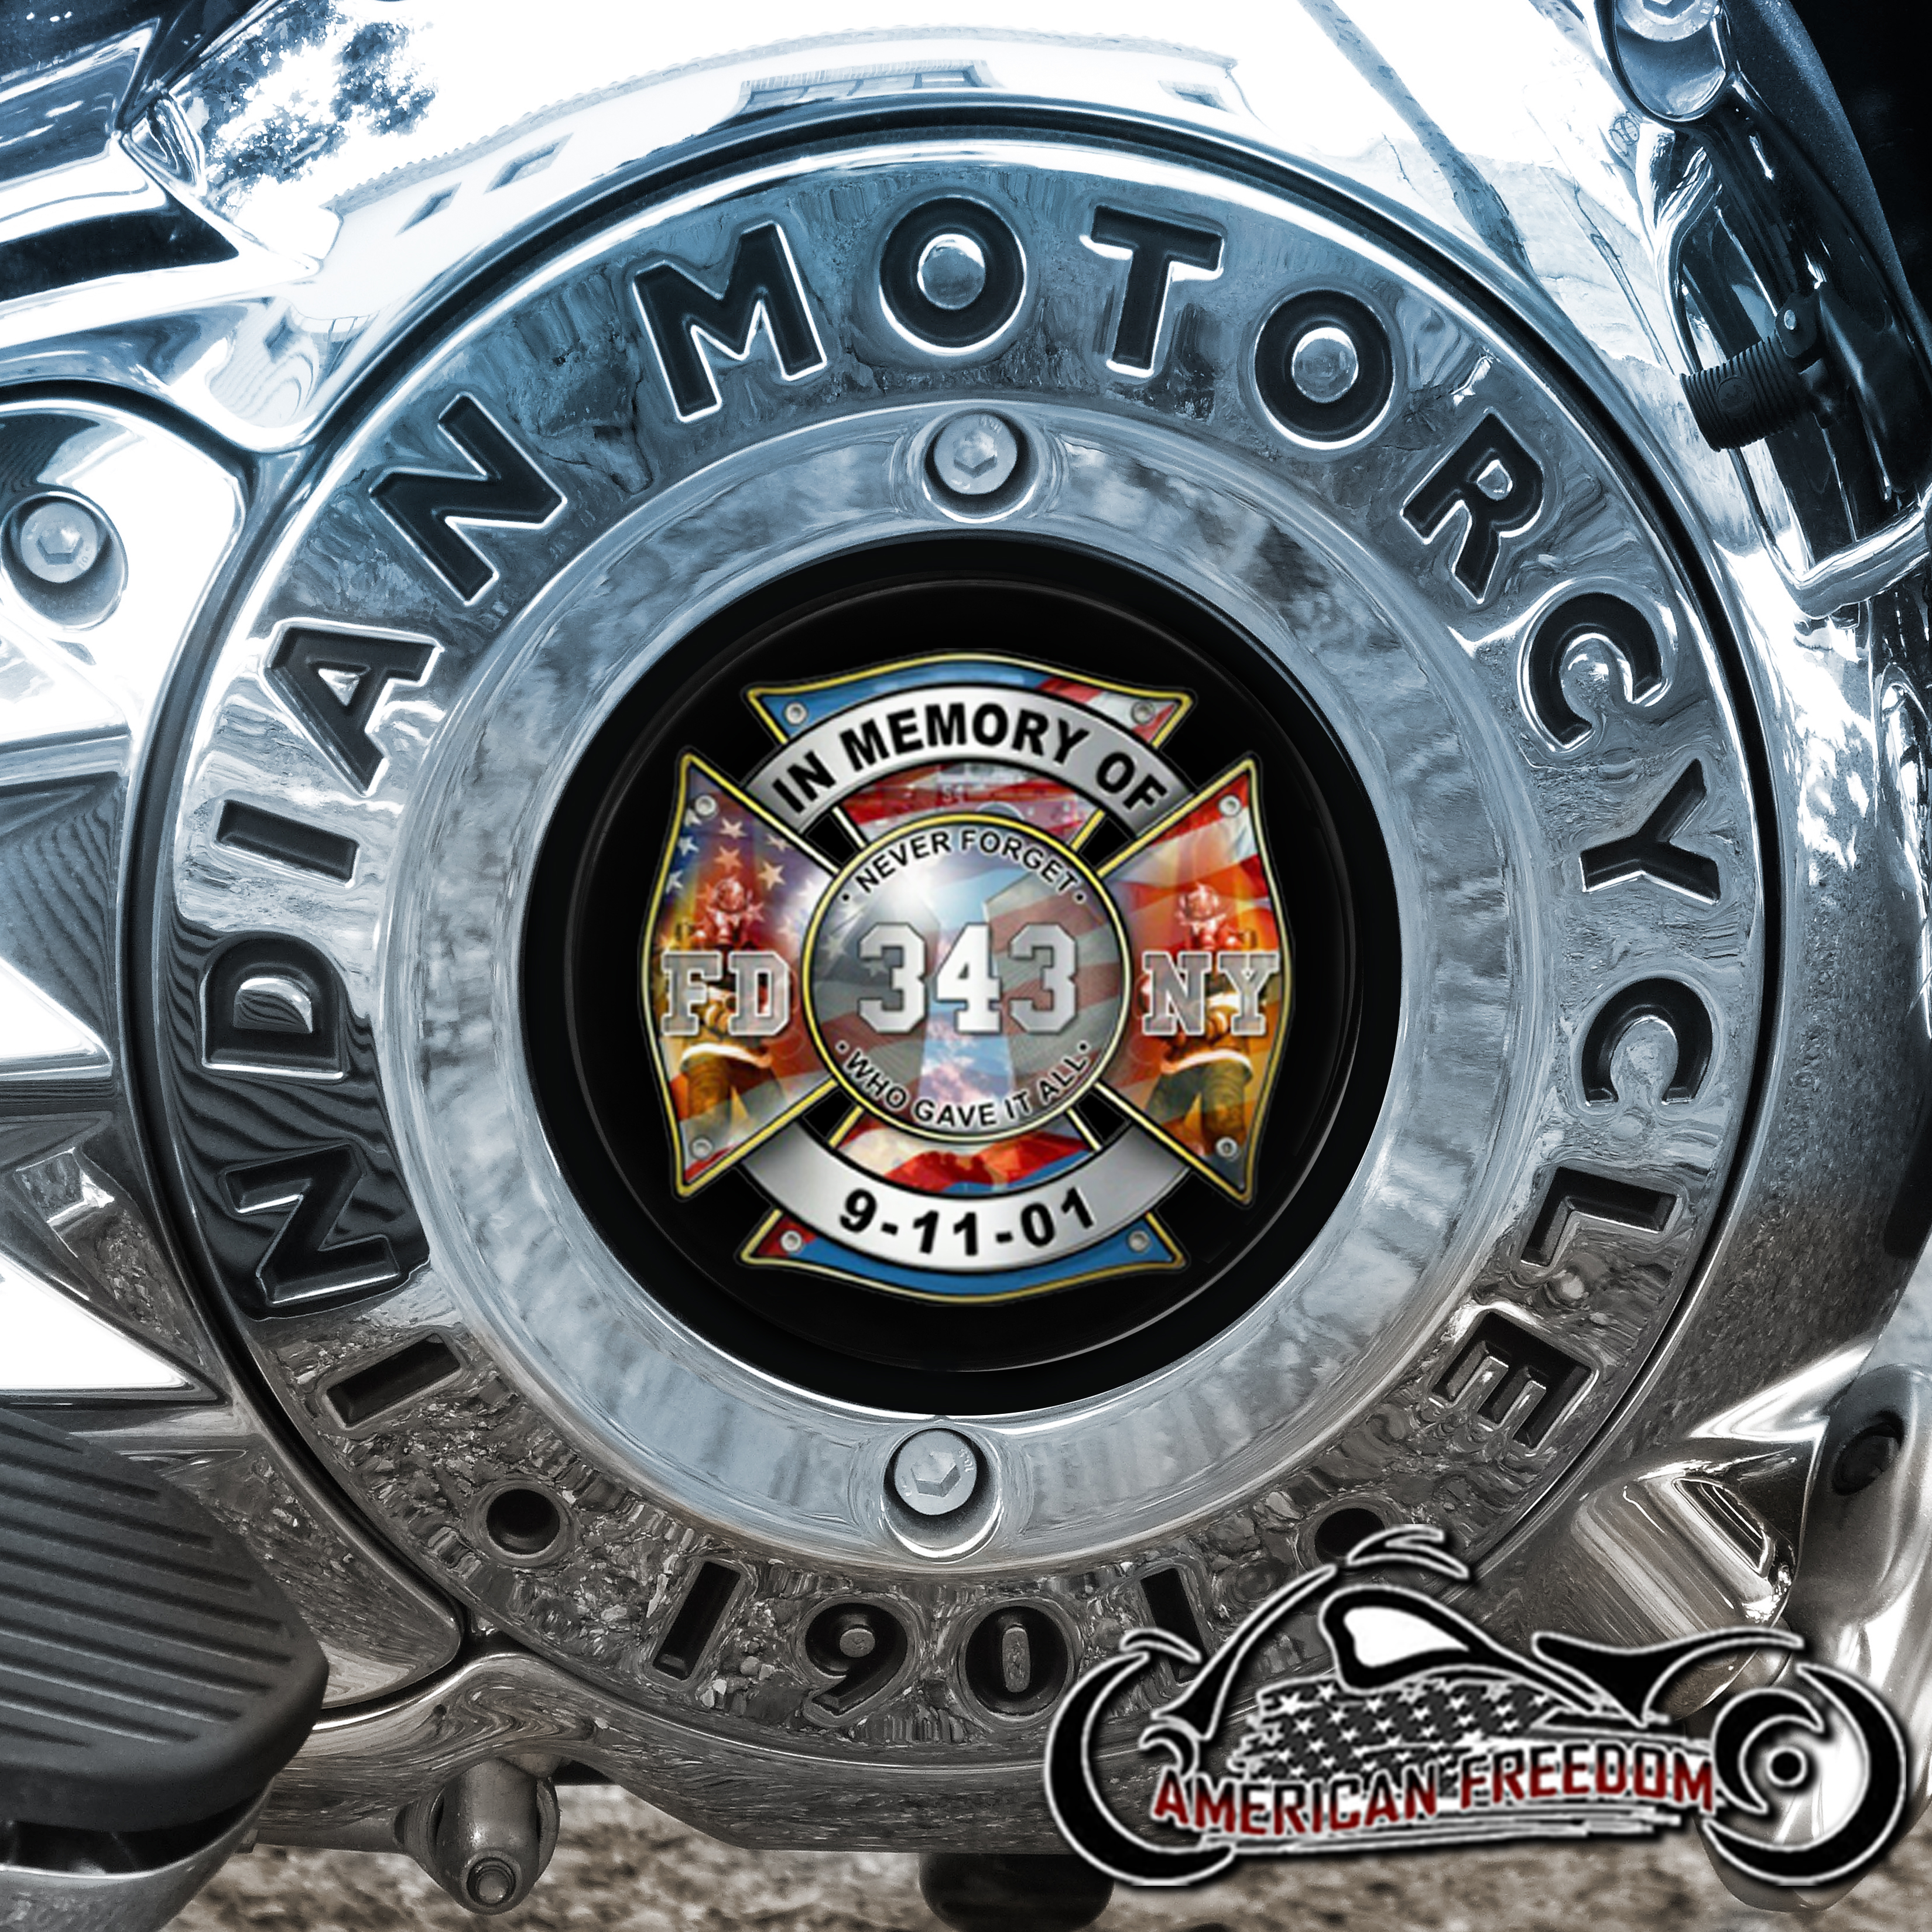 Indian Motorcycles Thunder Stroke Derby Insert - 343 In Memory